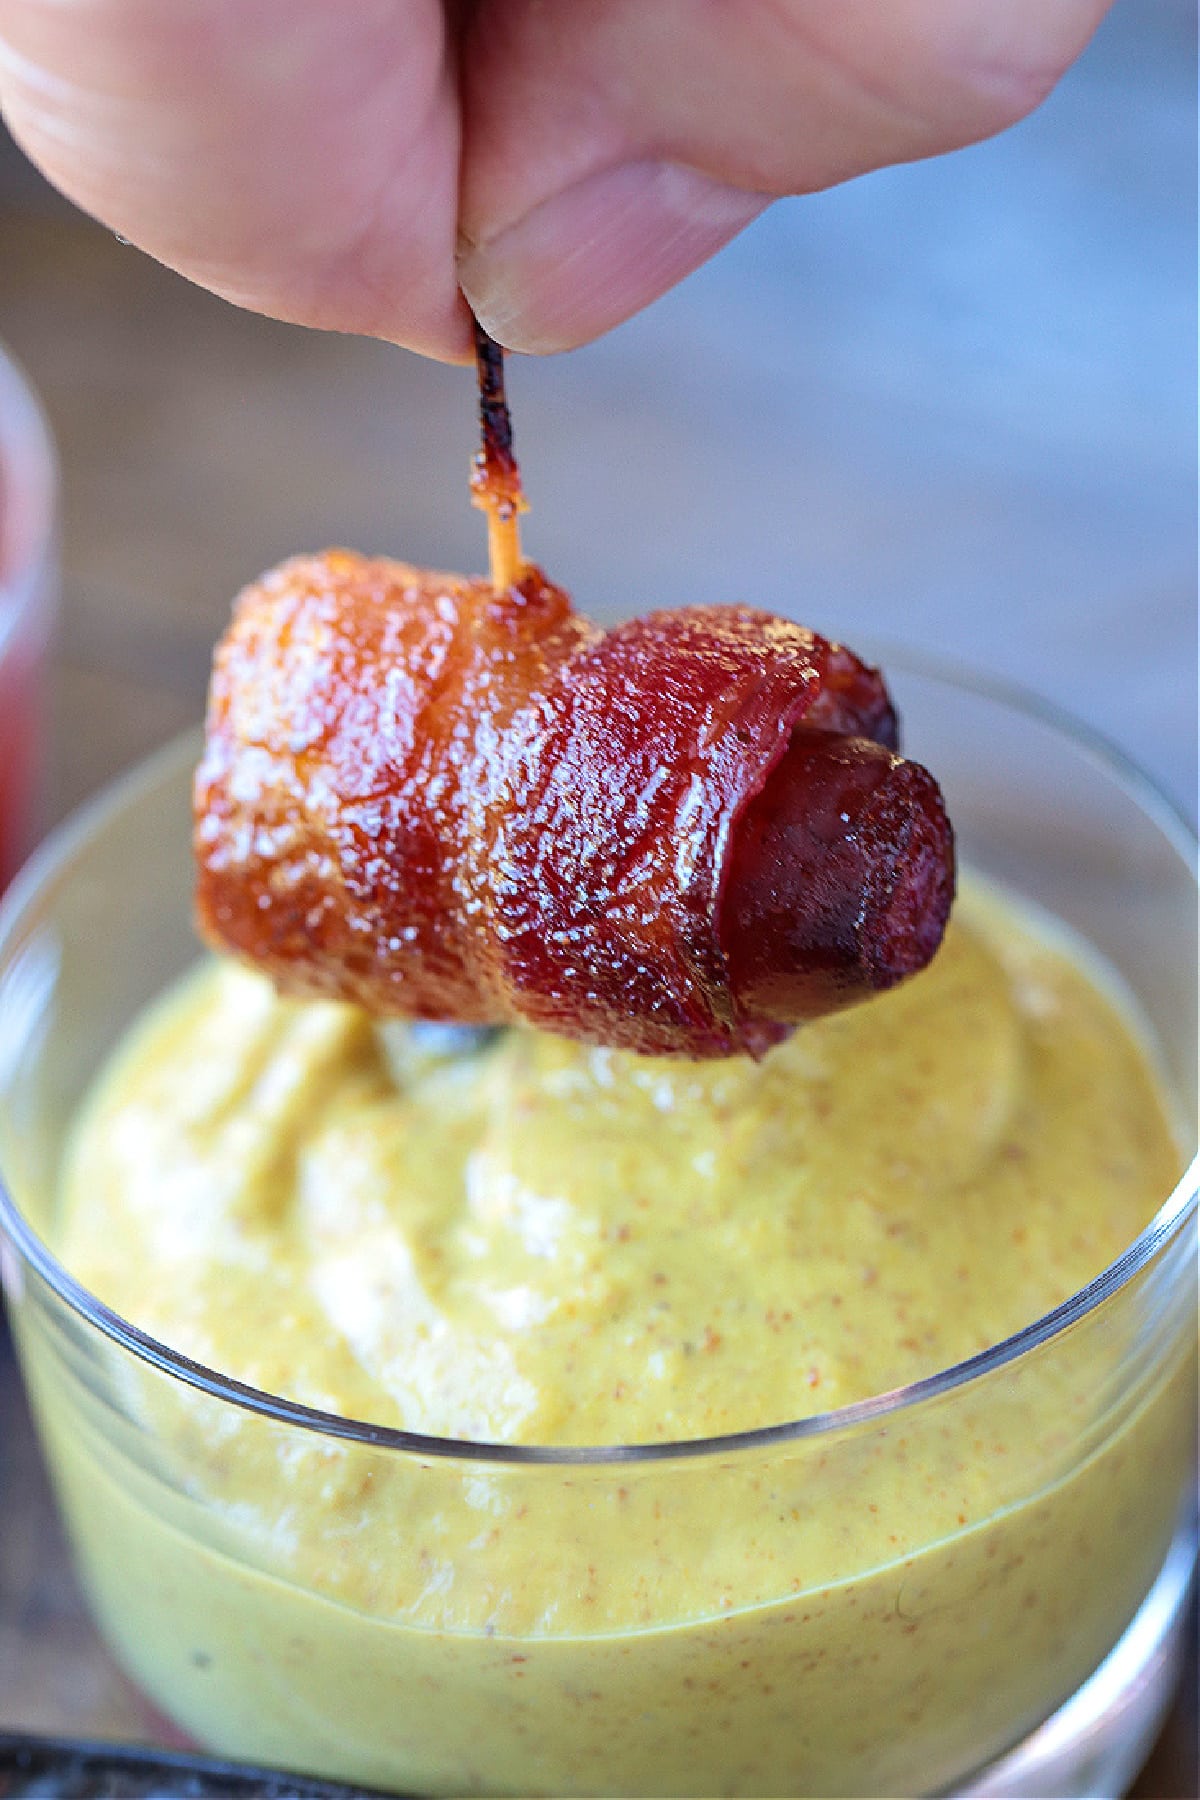 bacon wrapped hot dog dipping into mustard